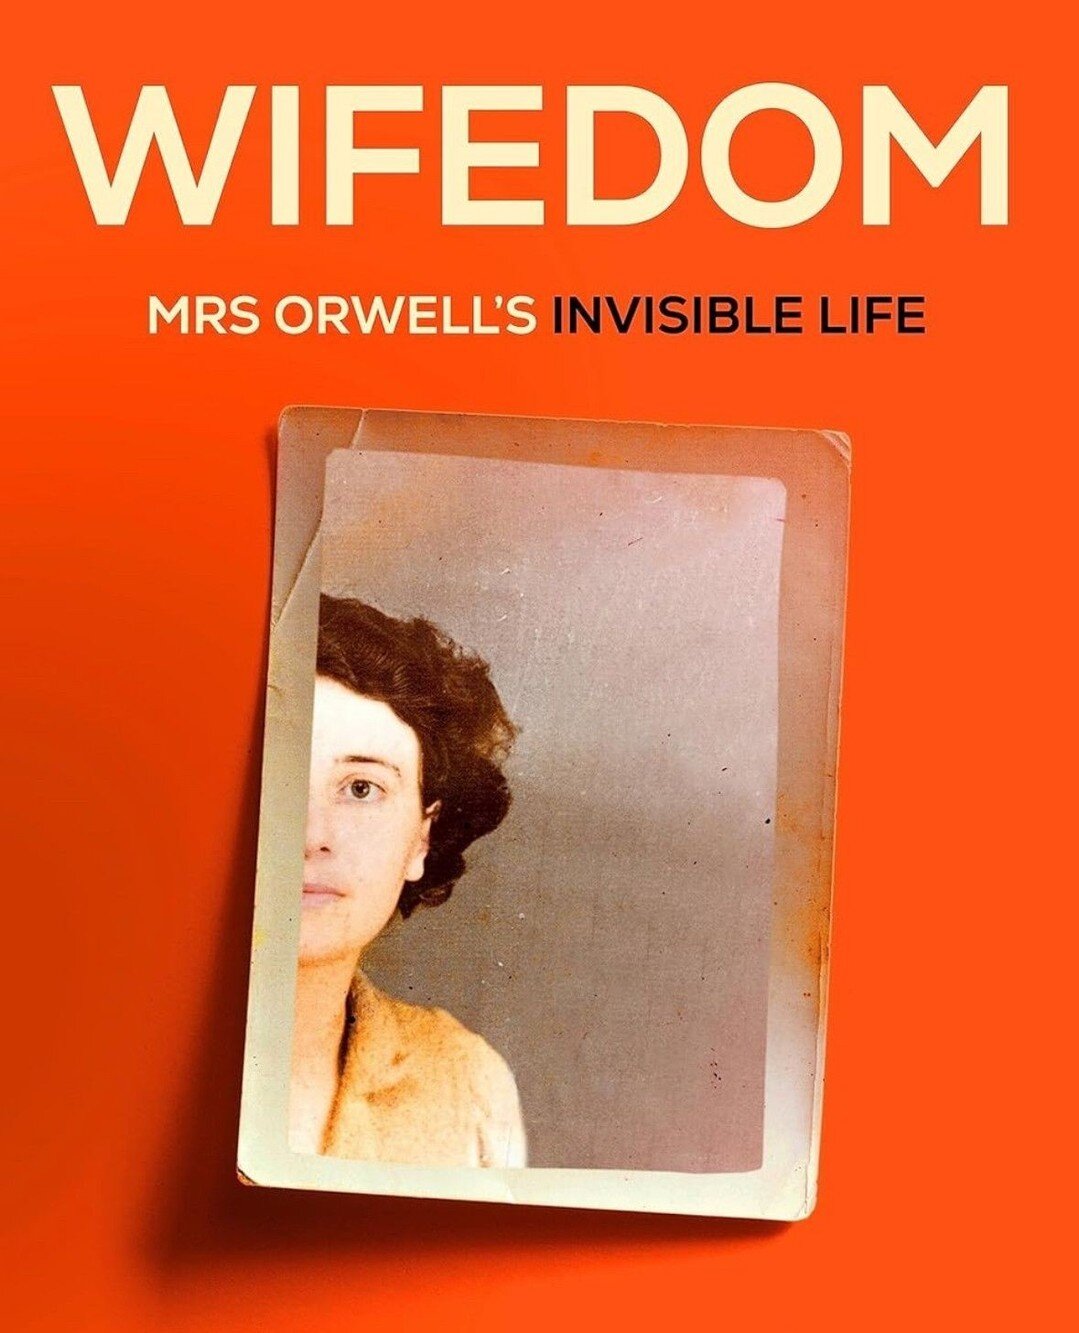 Women have been consciously and unconsciously erased from history.⁠
⁠
It turns out to be a happy coincidence that I am reading Anna Funder's &quot;Wifedom: Mrs. Orwell's Invisible Life&quot; in the month of International Women's Day. ⁠
⁠
In telling t